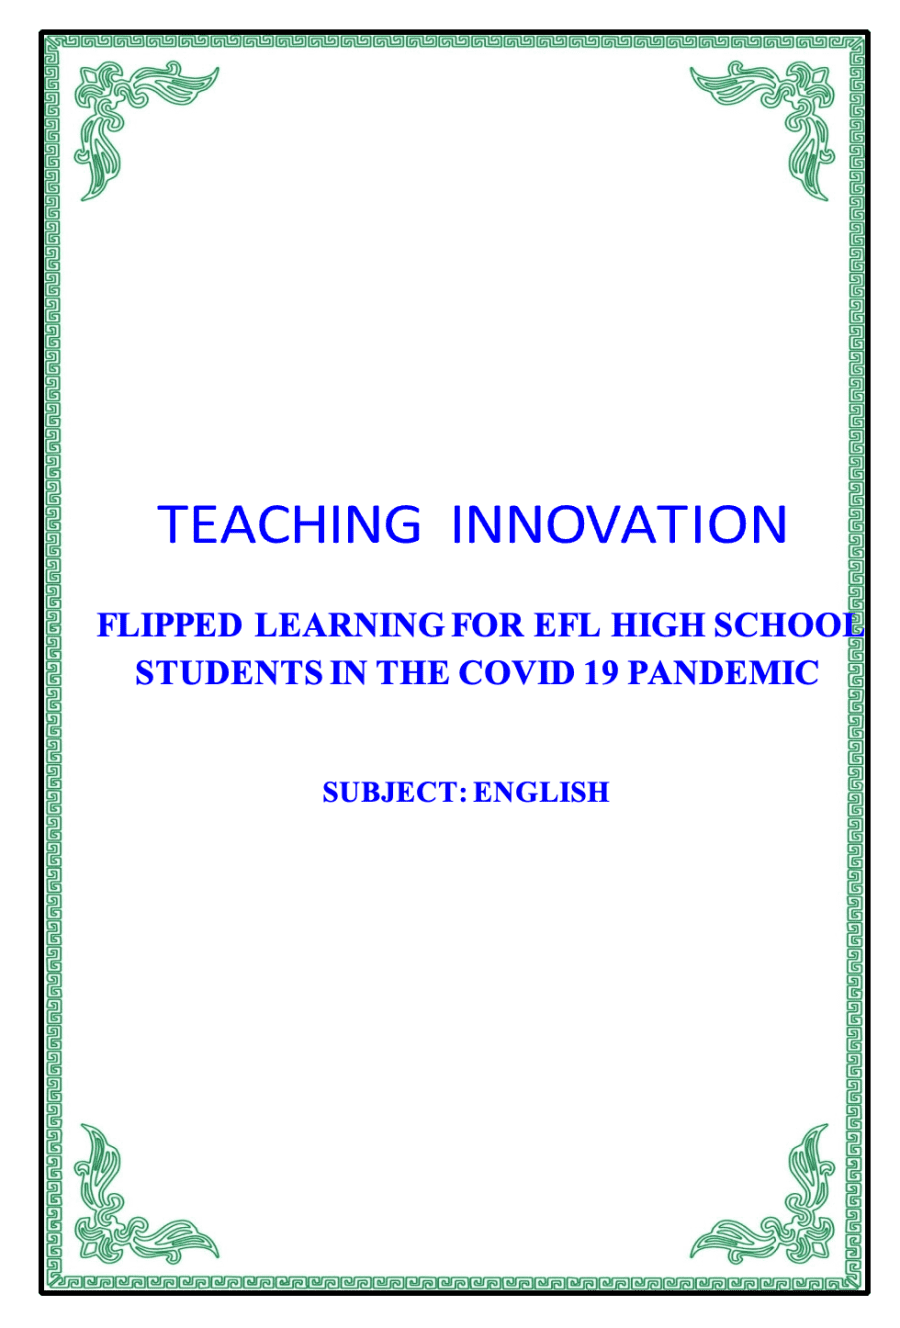 SKKN Flipped Learning for EFL High School Students in the Covid 19 Pandemic